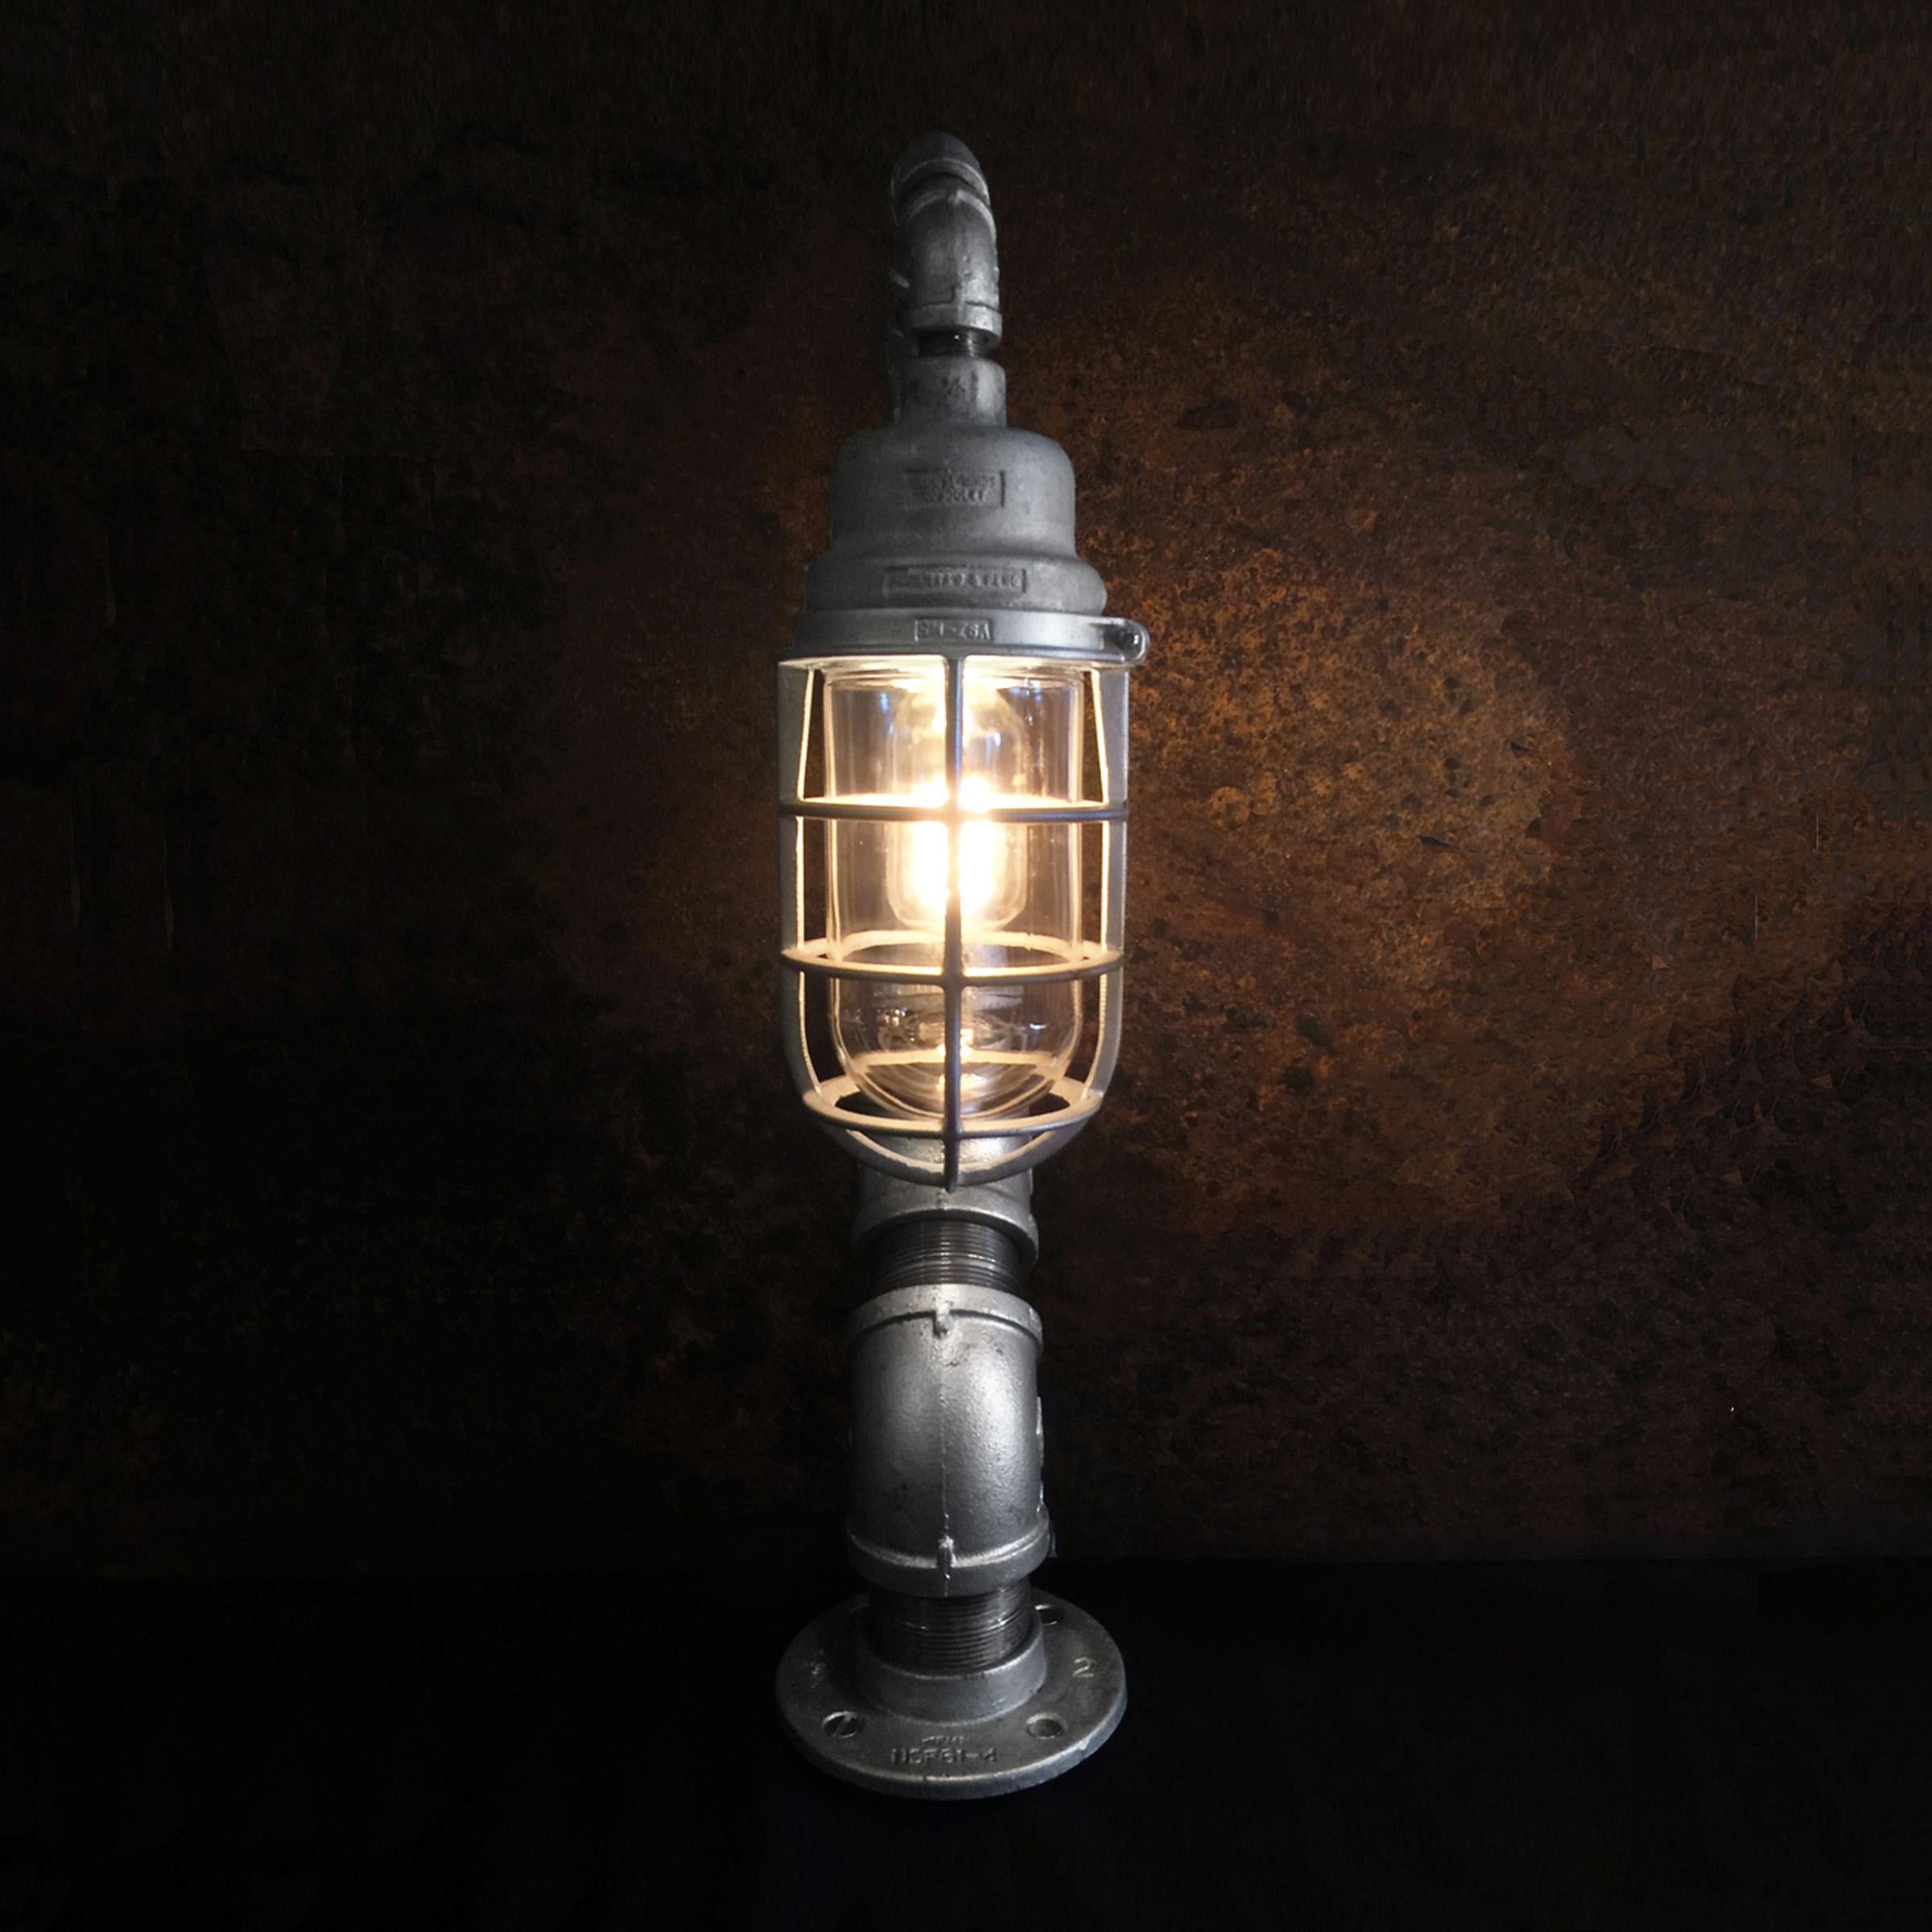 Galvanized Modern Industrial Table Lamp - Industrial Decor - Crouse Hinds Industrial Light For Sale